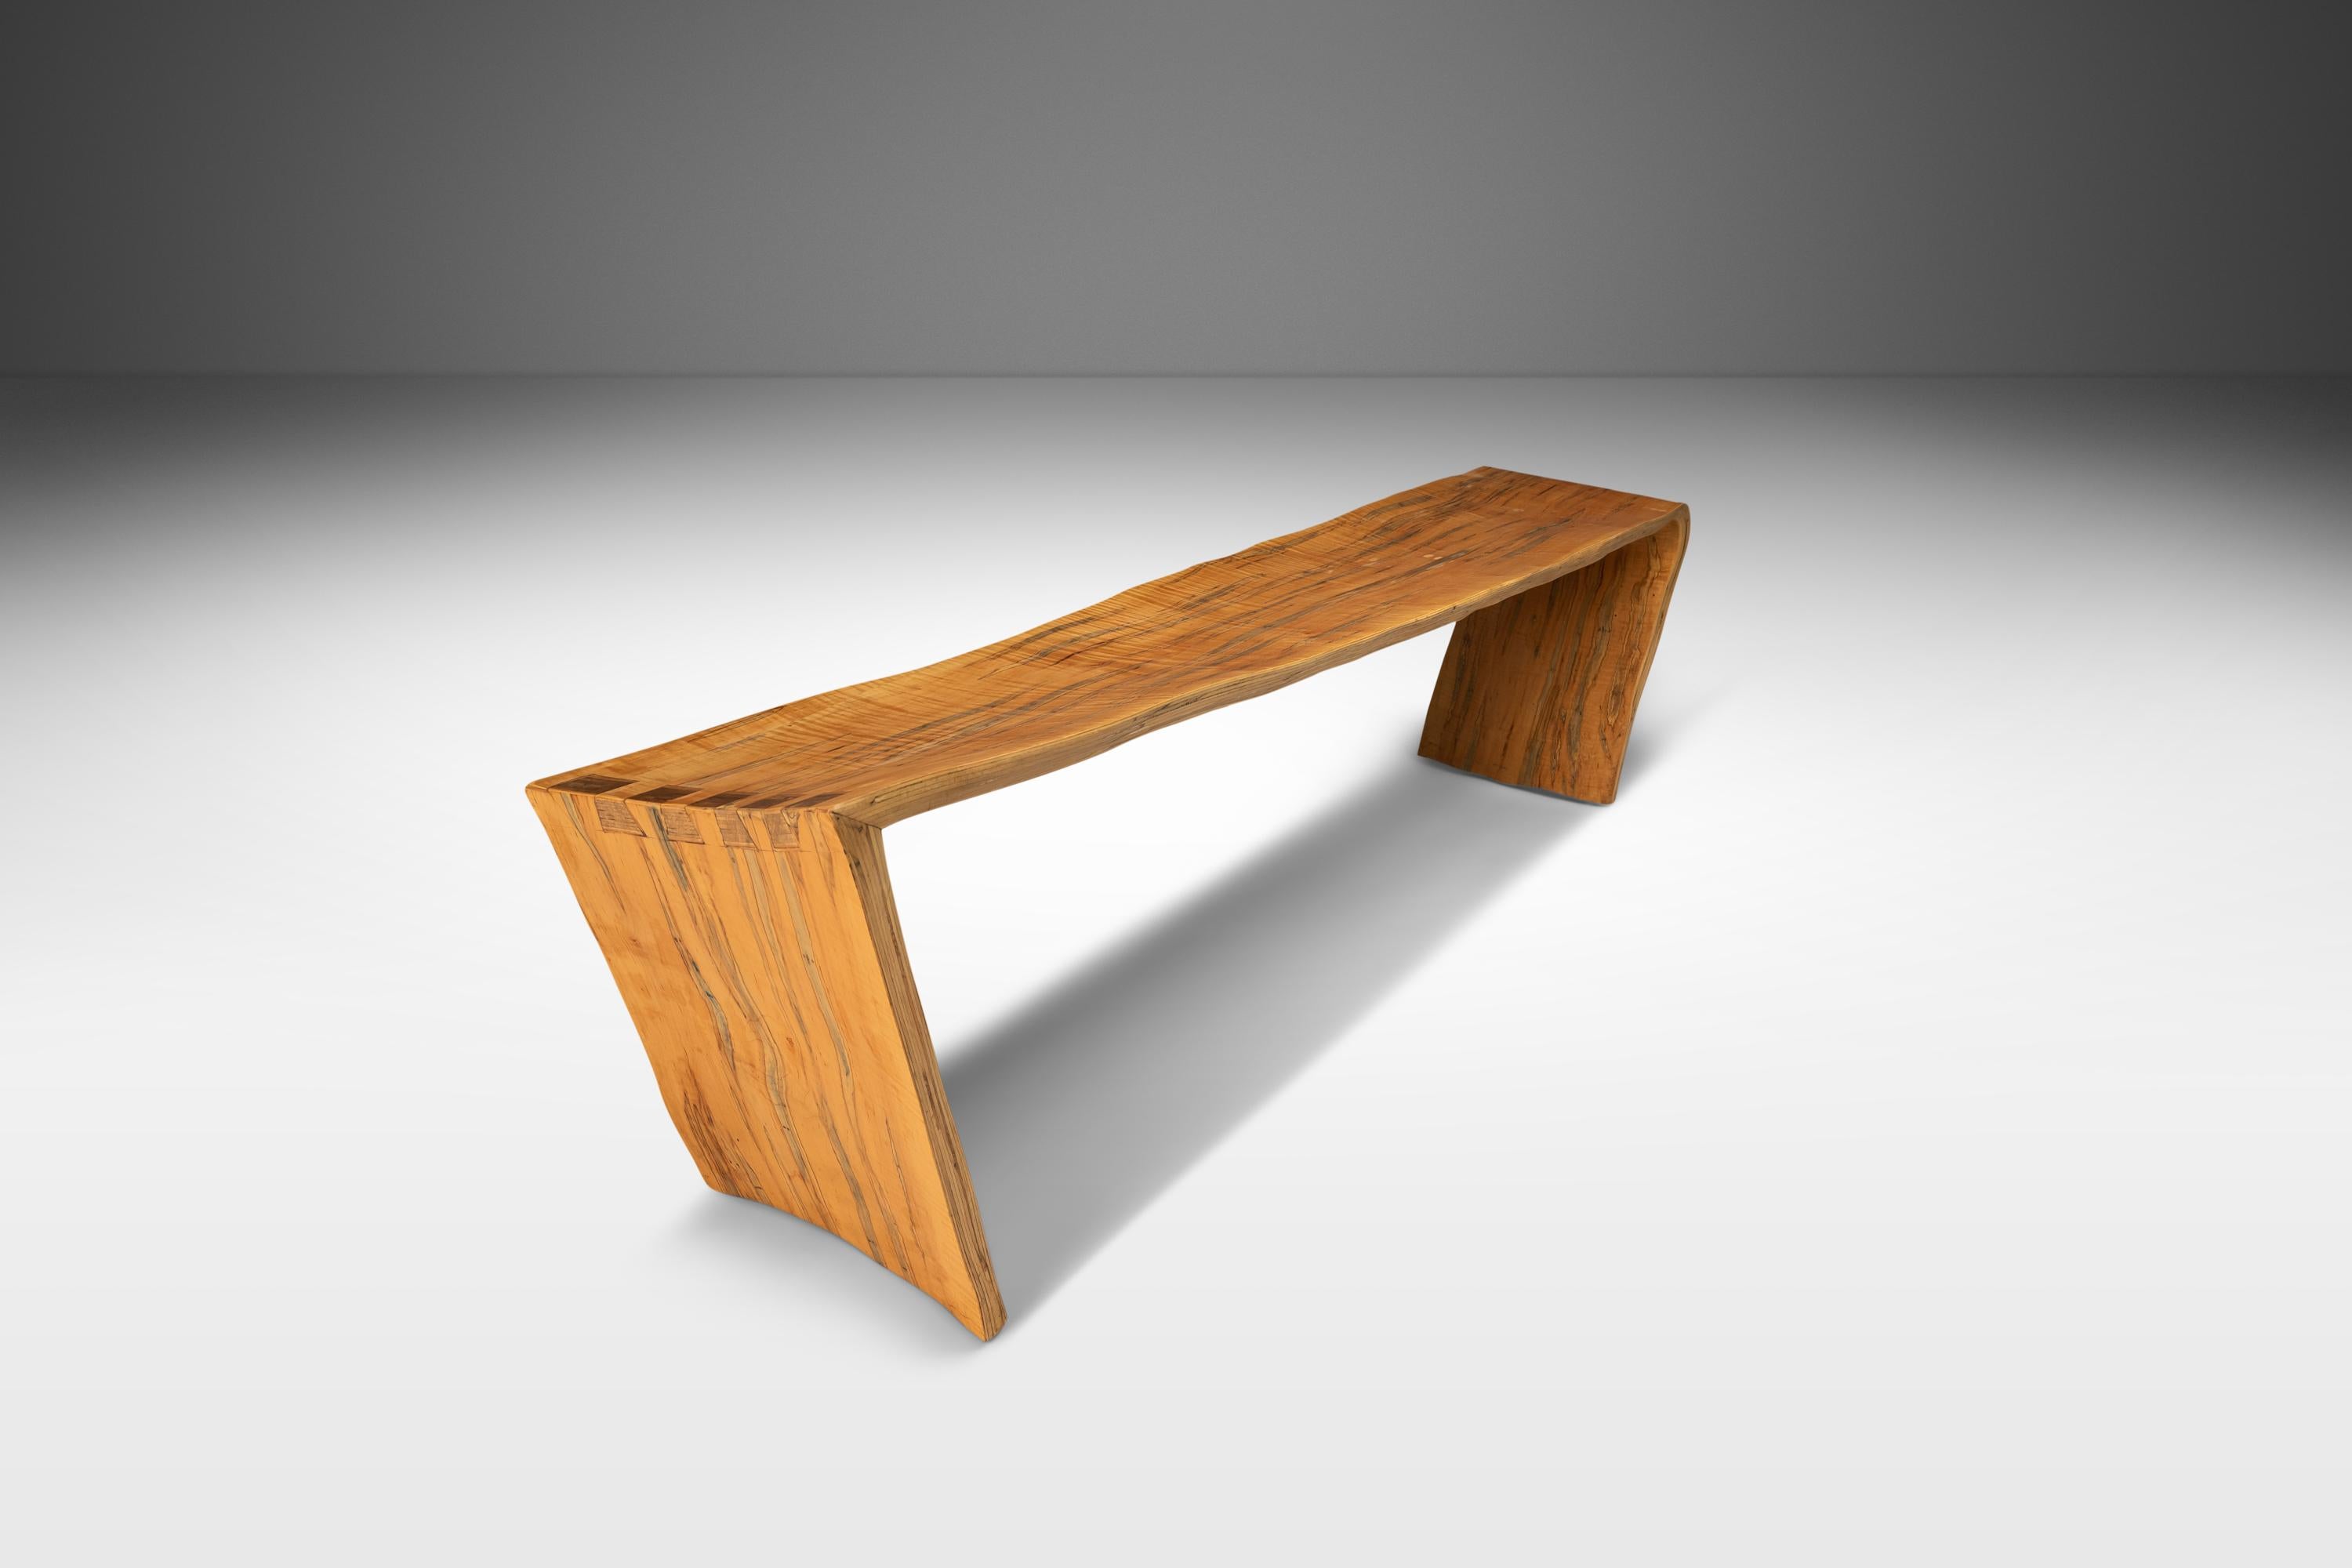 Bentwood Asymmetrical Abstract Three Seater Bench in Ambrosia Maple, Usa, 1980s For Sale 3